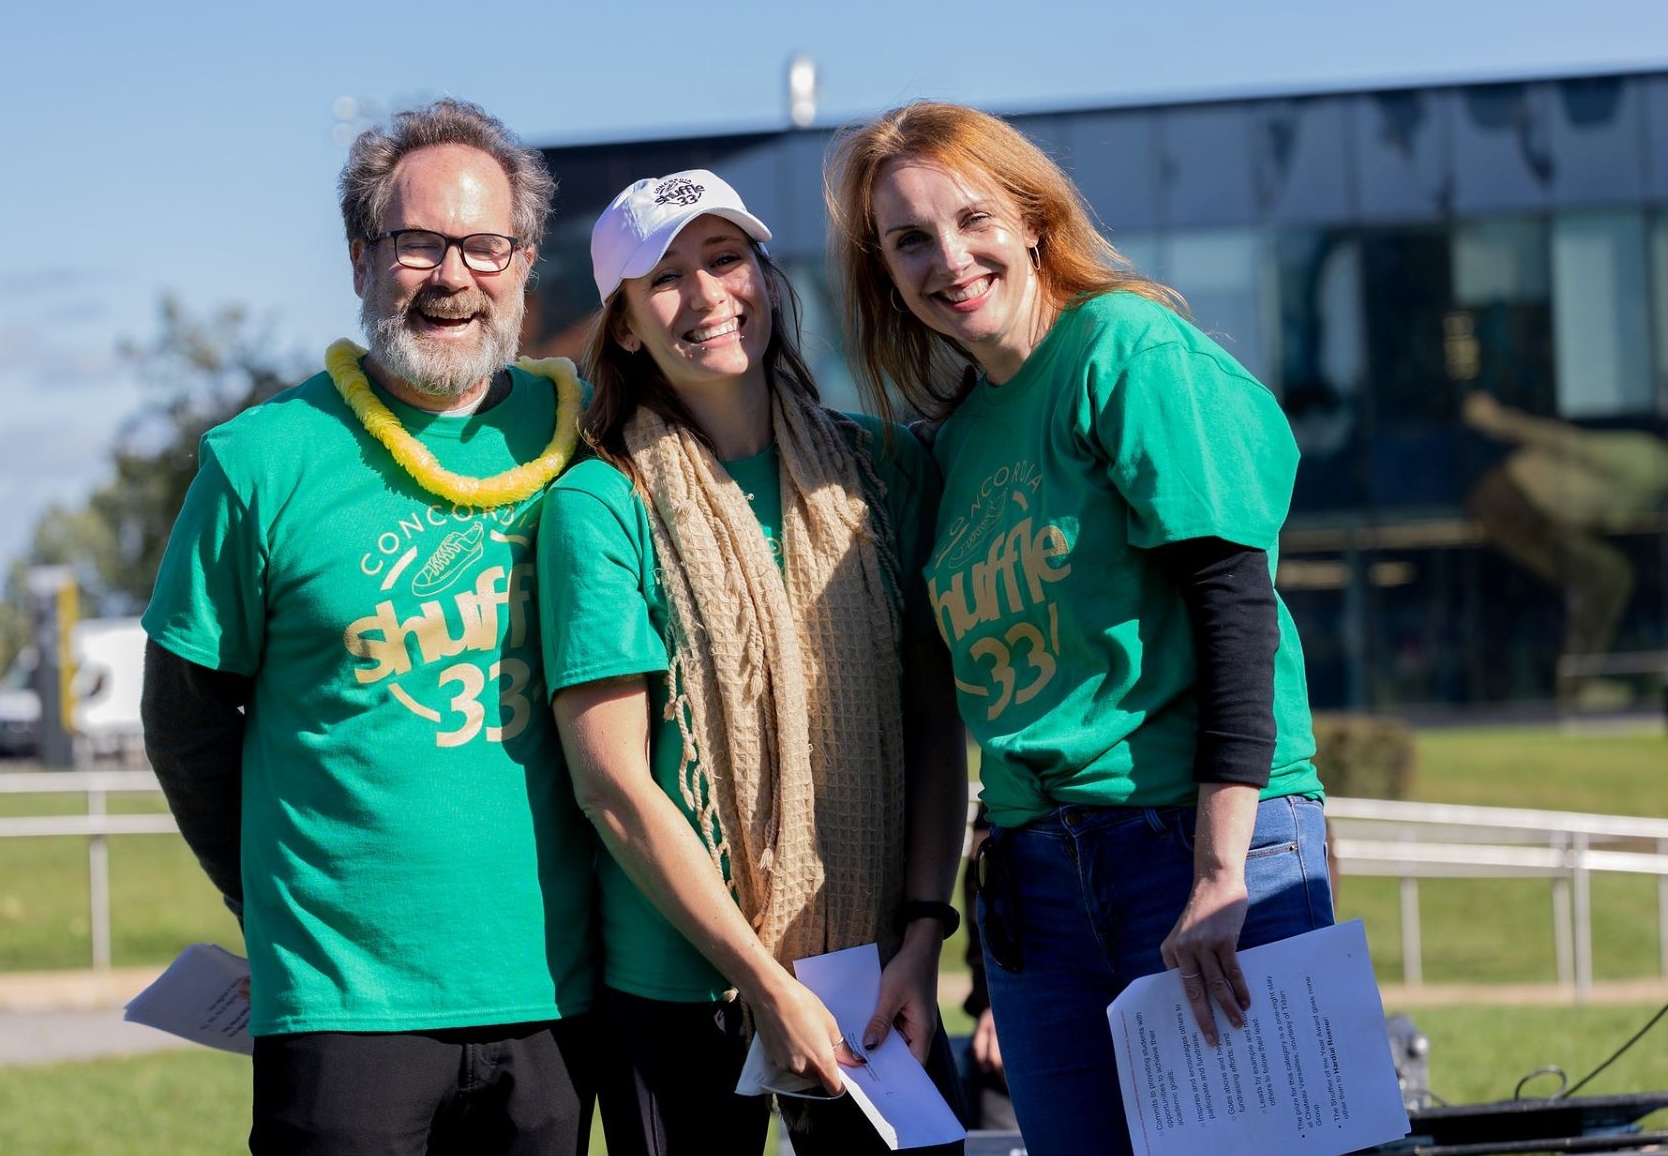 Three people standing together wearing green Shuffle T-shirts